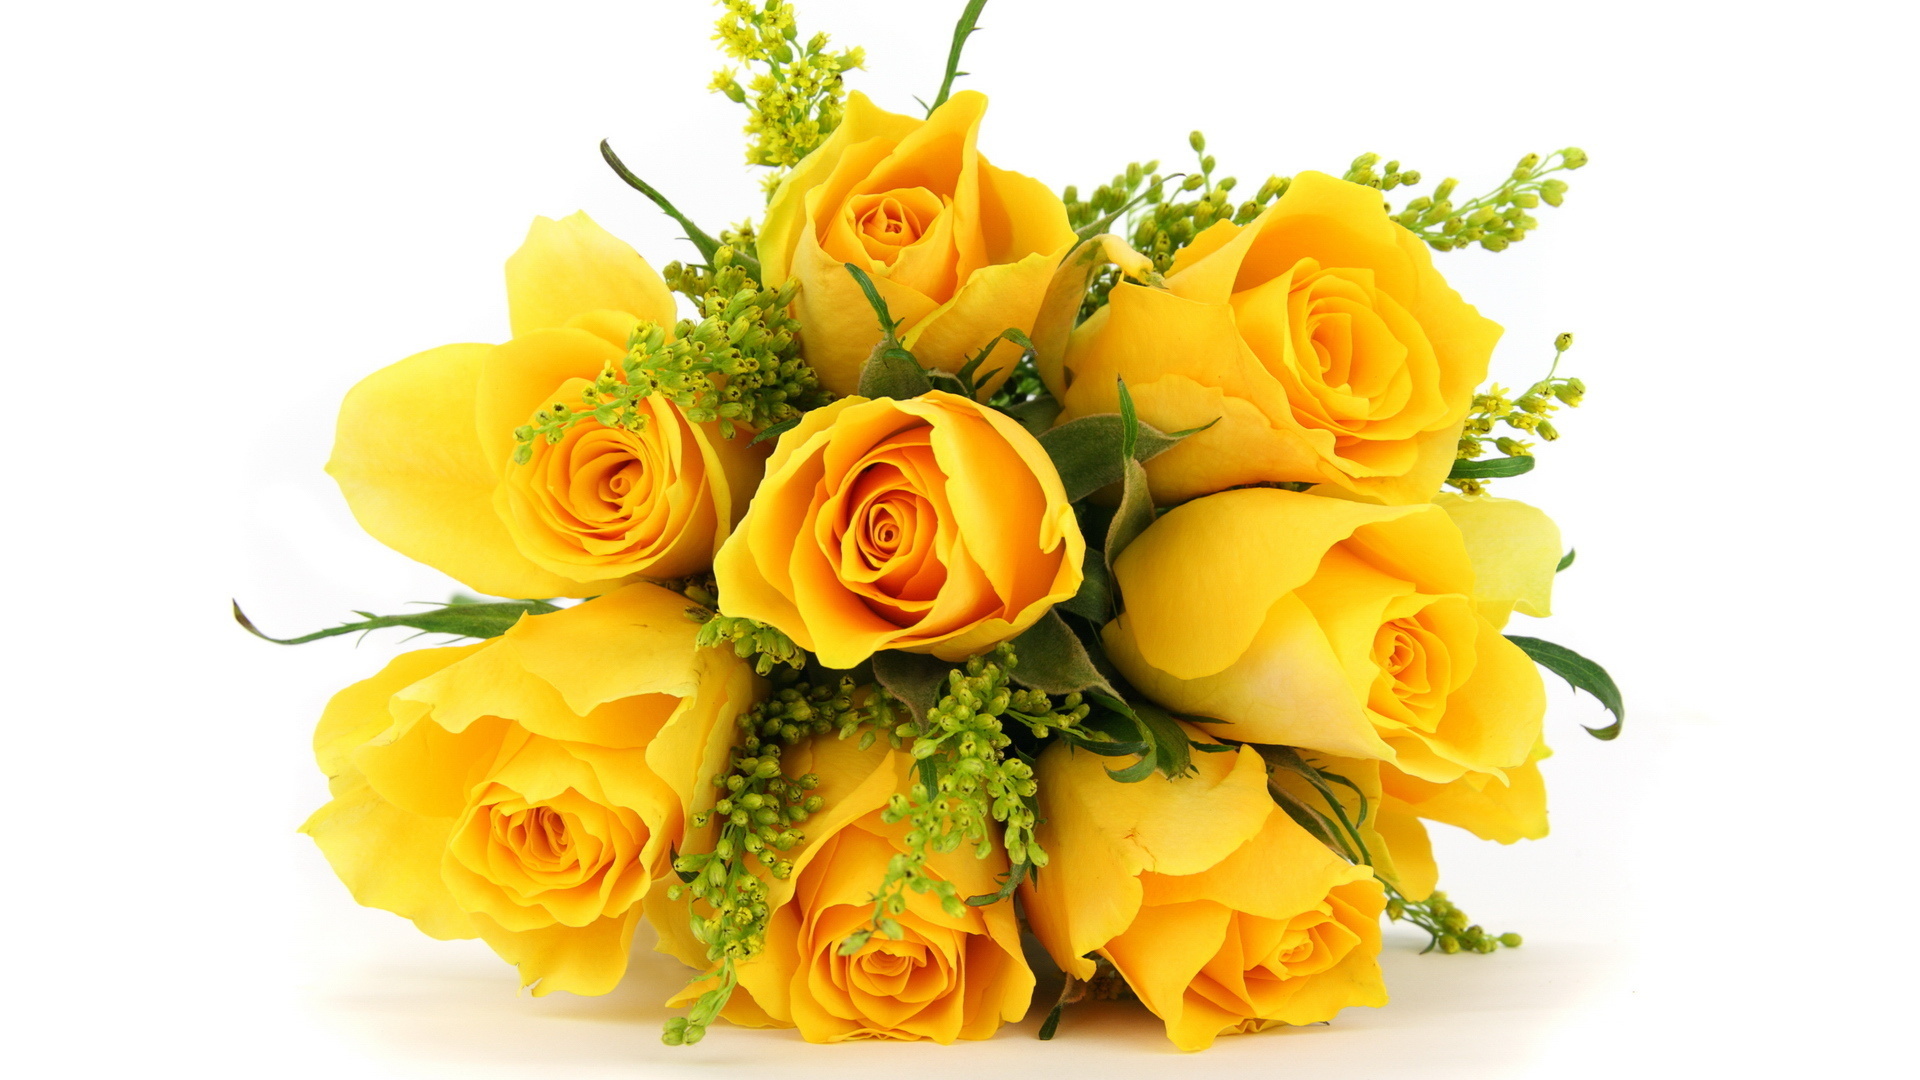 Flowers :: Bouquets :: Yellow Roses :: Bouquet of 12 Yellow Roses